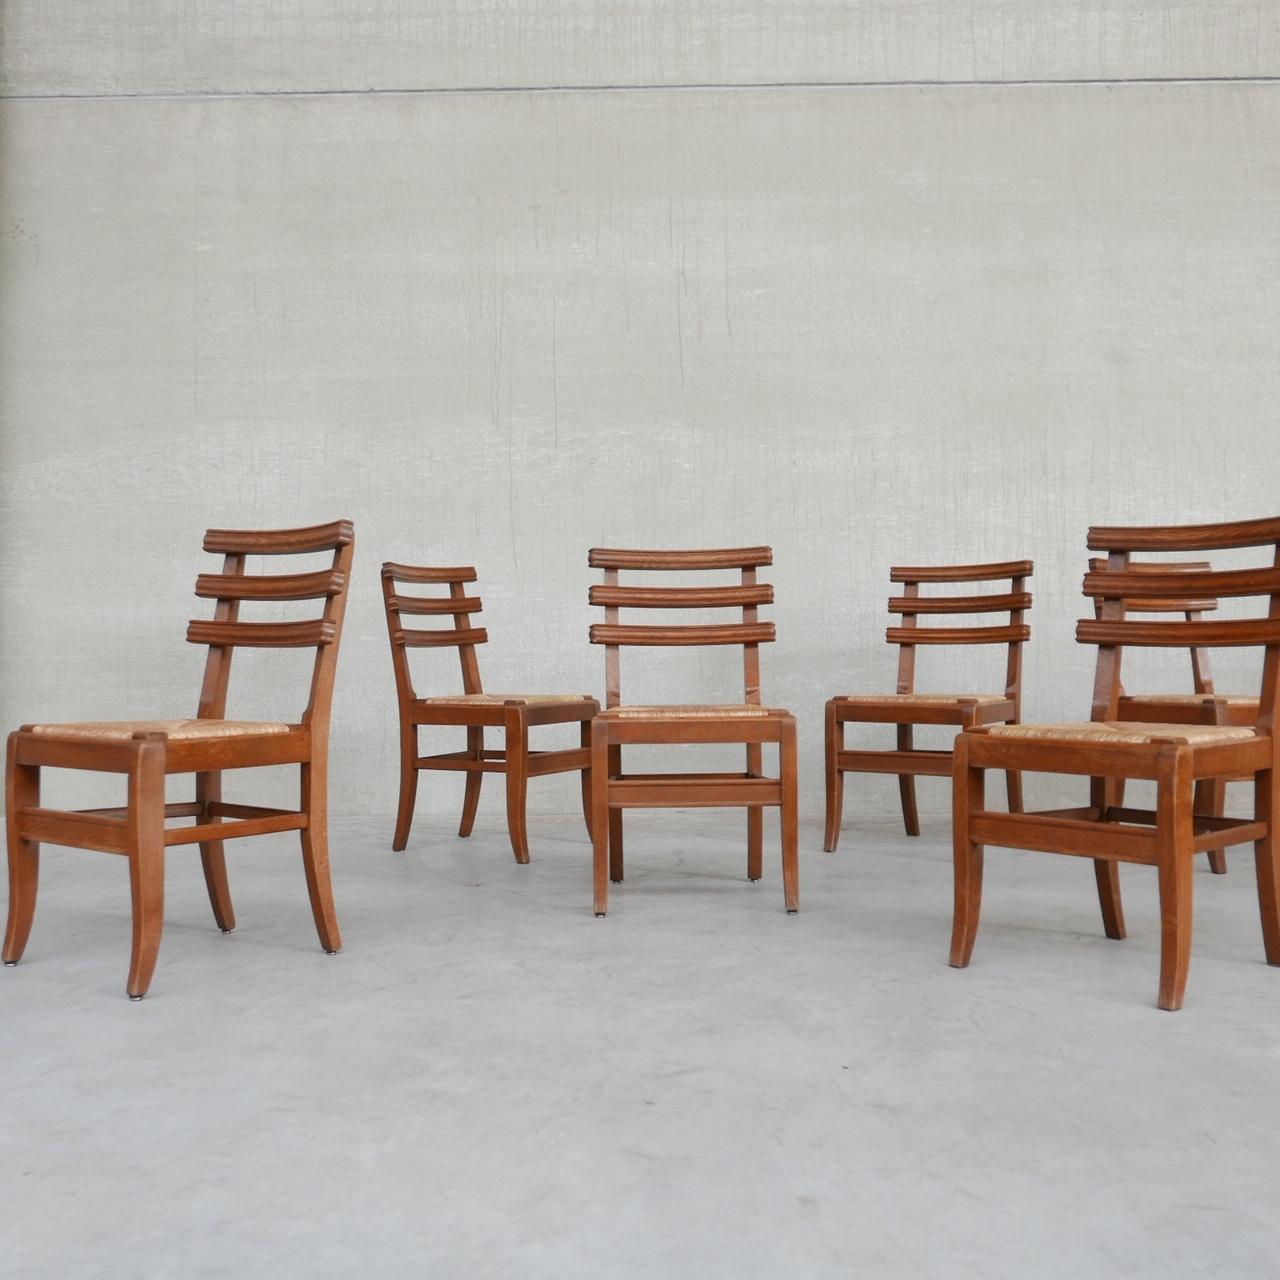 A good quality set of six dining chairs. 

France, circa 1950s. 

Three straps of curved wood to the backs. 

Rush seats. 

An unusual model we haven't seen before. 

The curved backs make them comfy and stylish.

Location: Belgium